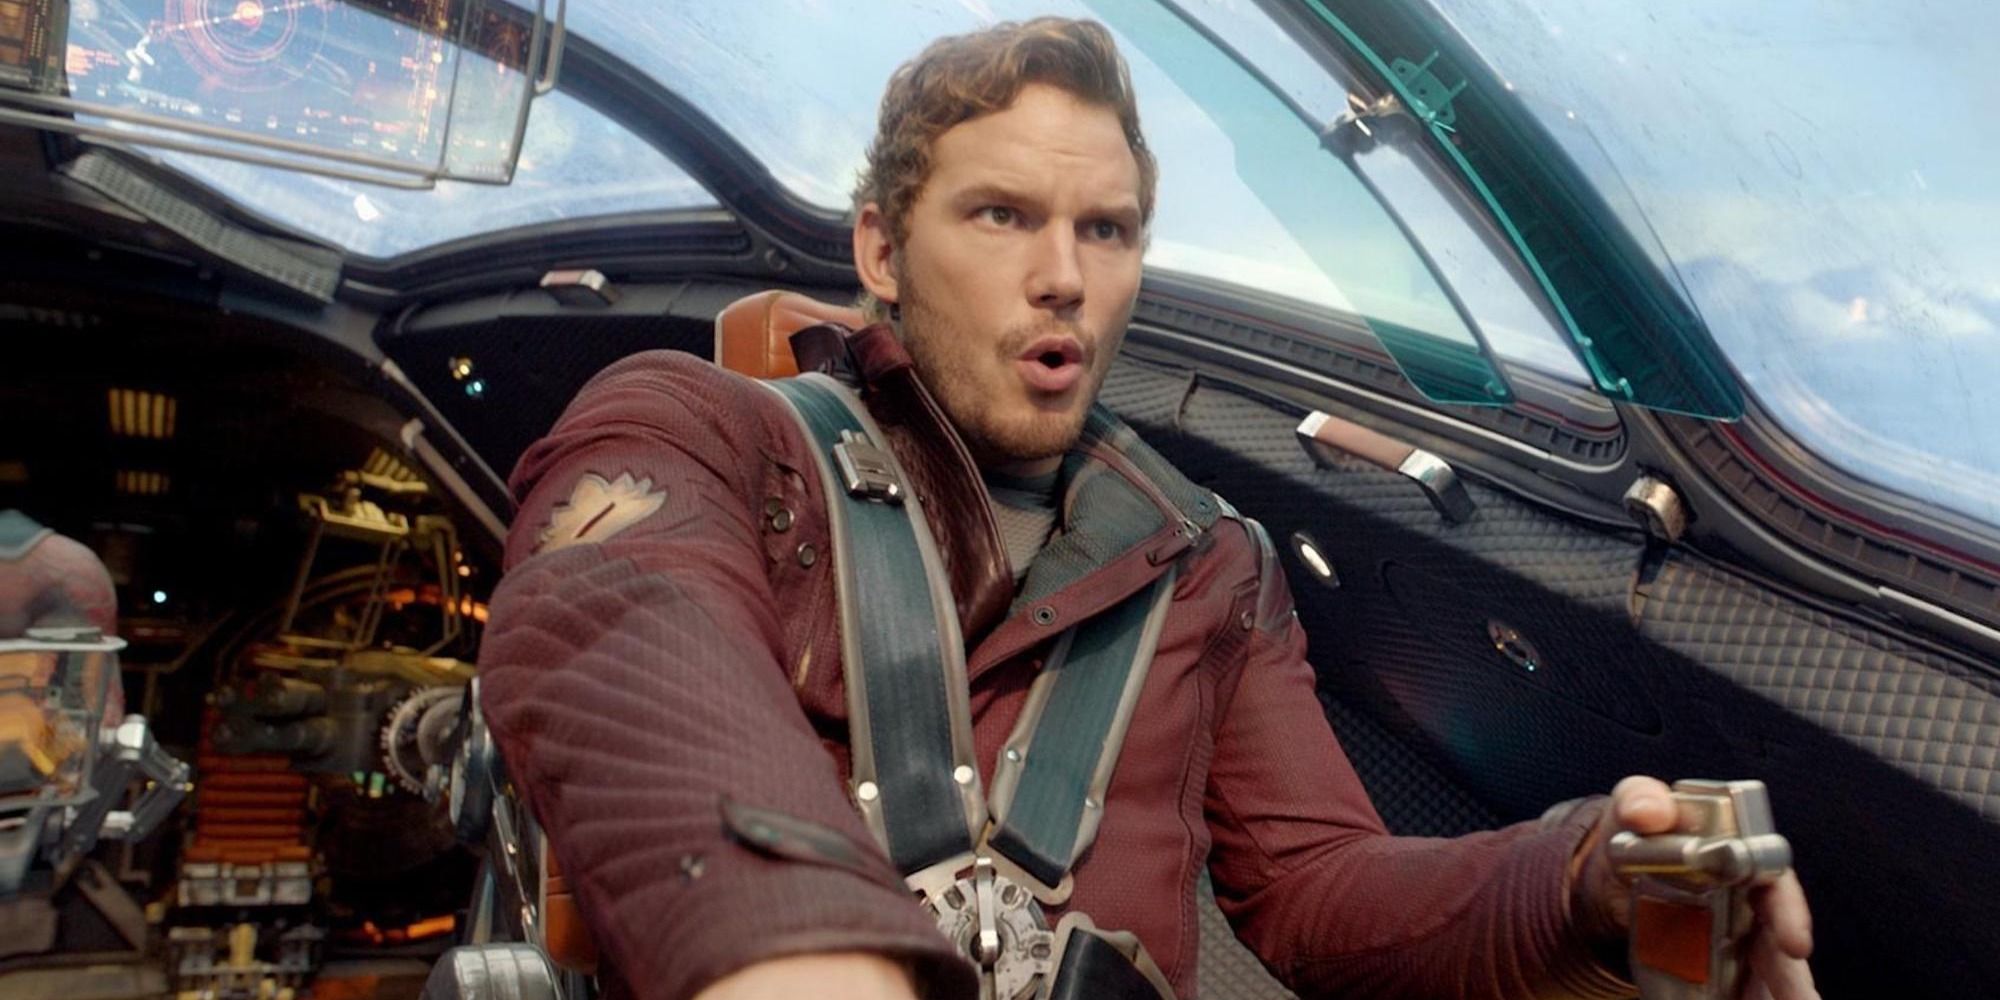 Intergalactic bandit Peter Quill aka Star Lord pilots Milano in 'Guardians of the Galaxy'.